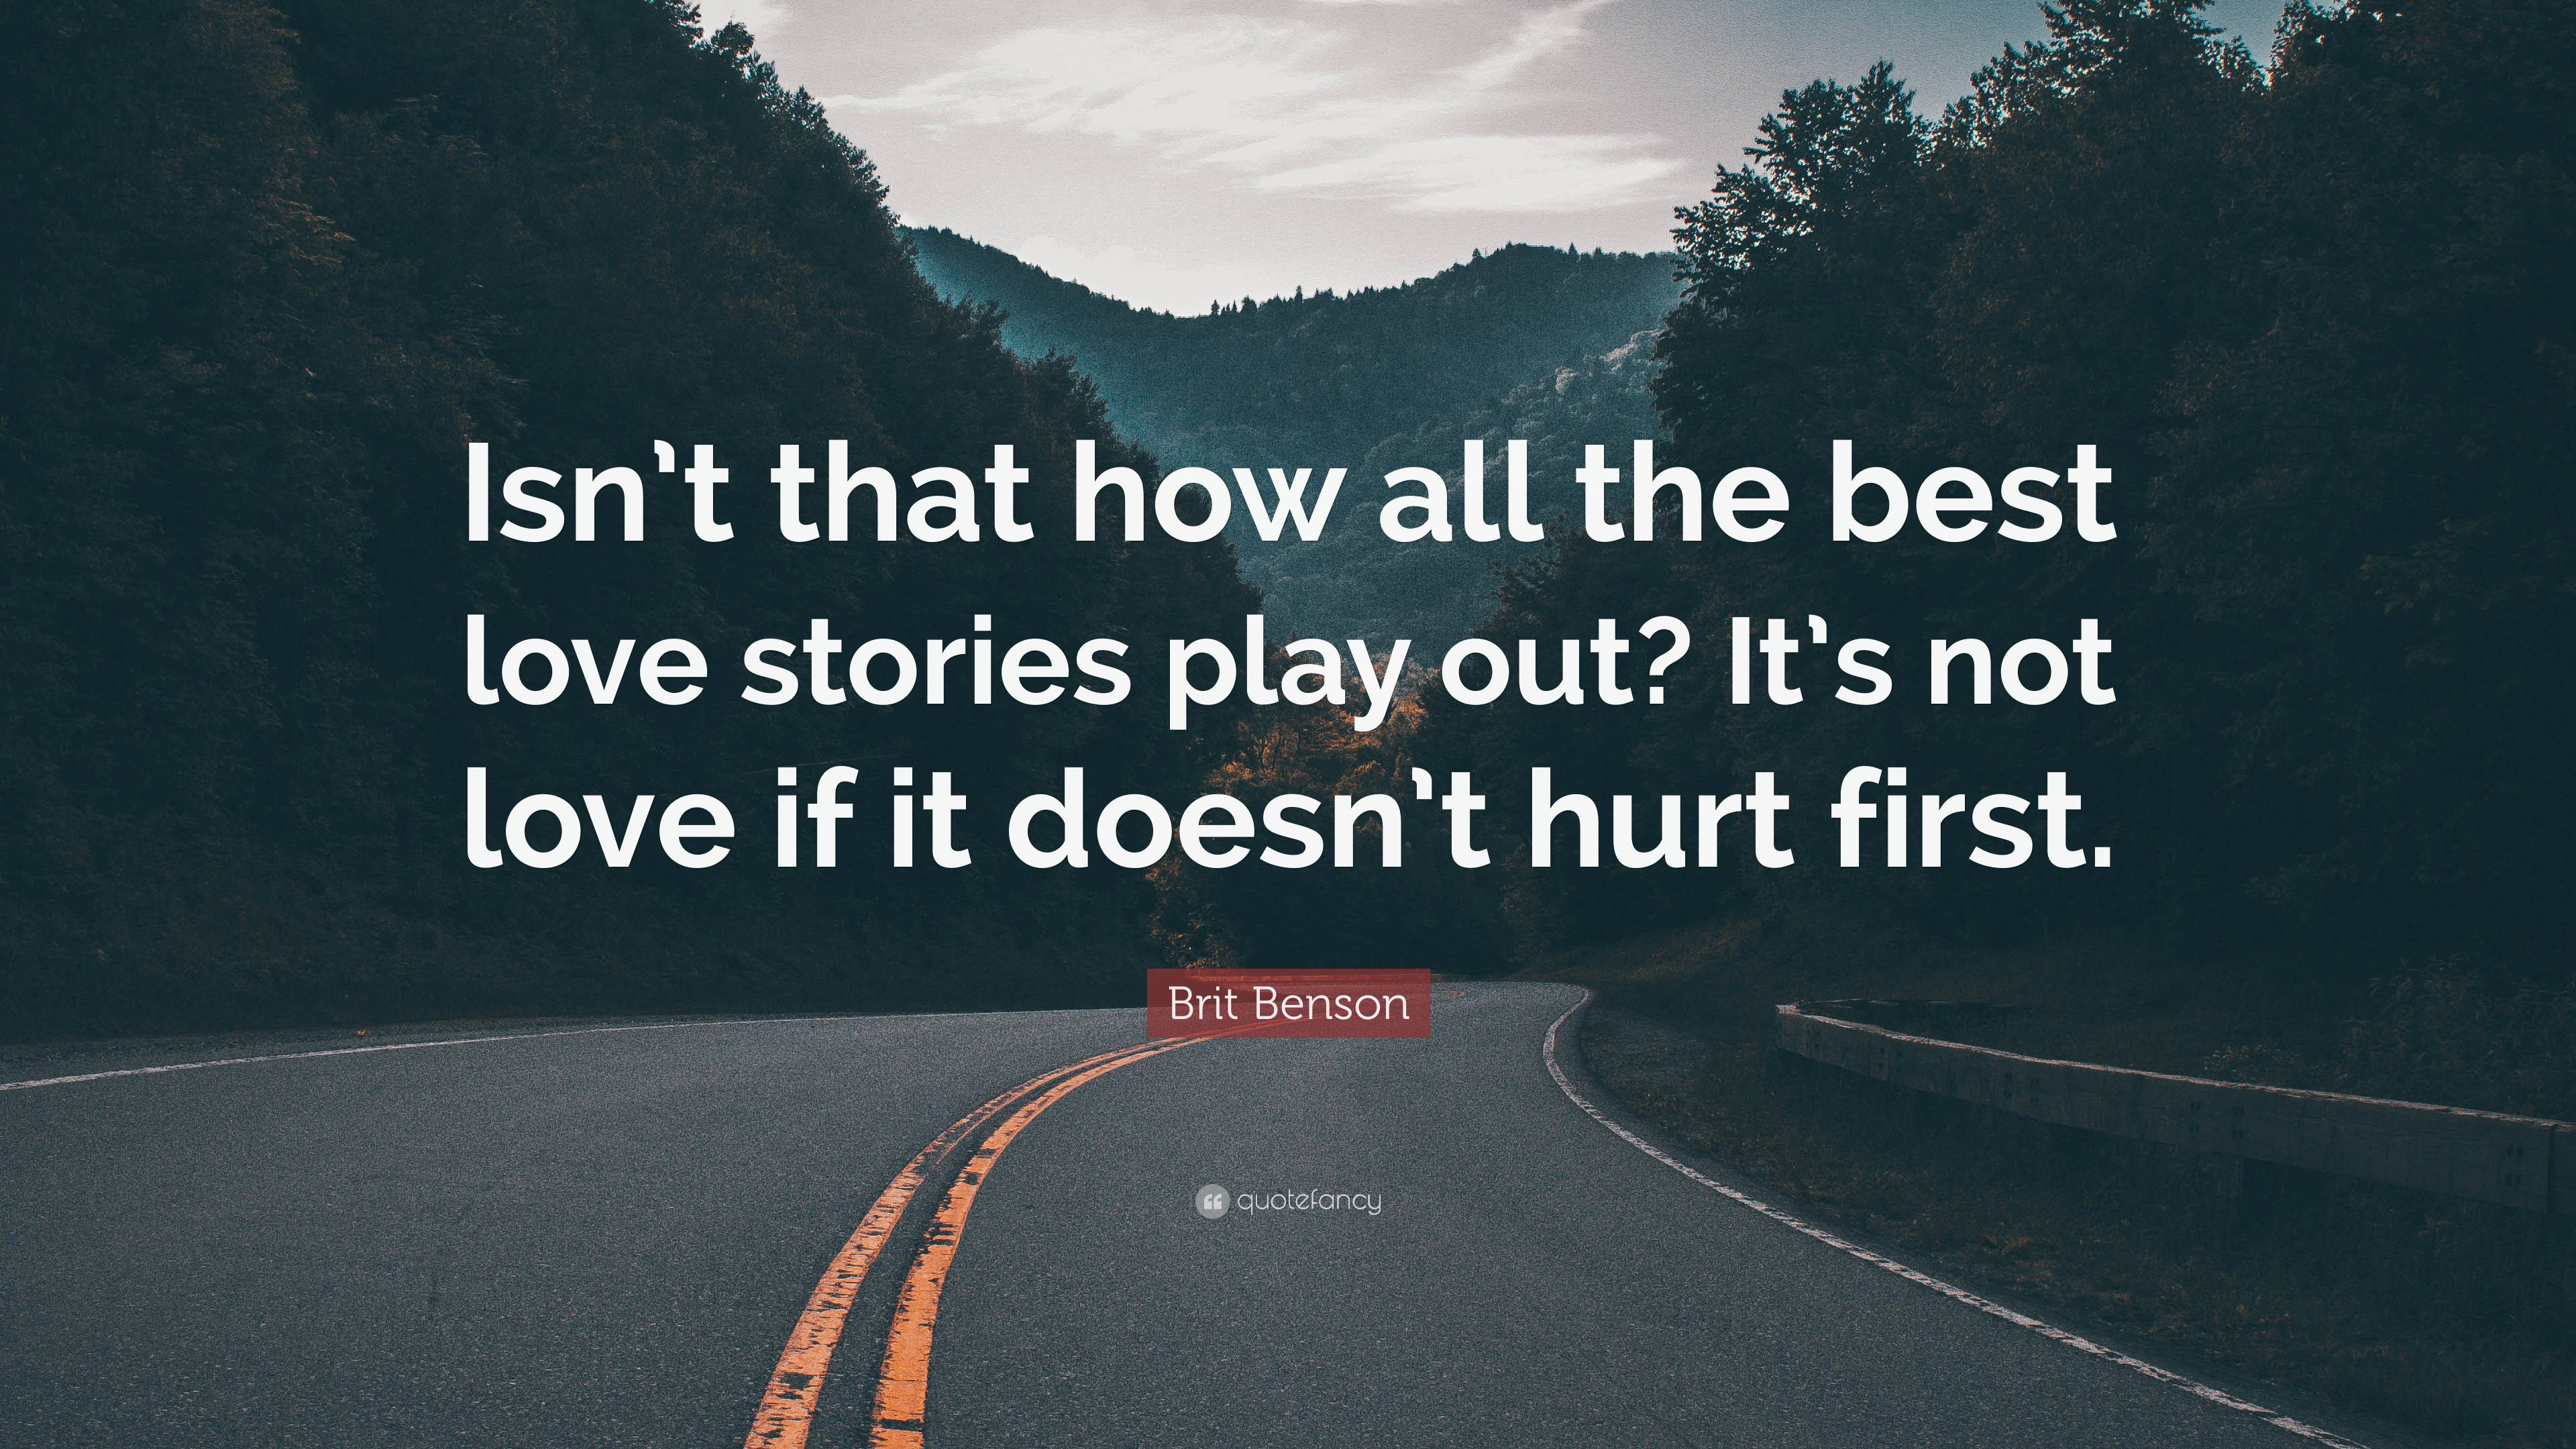 Brit Benson Quote: “Isn’t that how all the best love stories play out ...